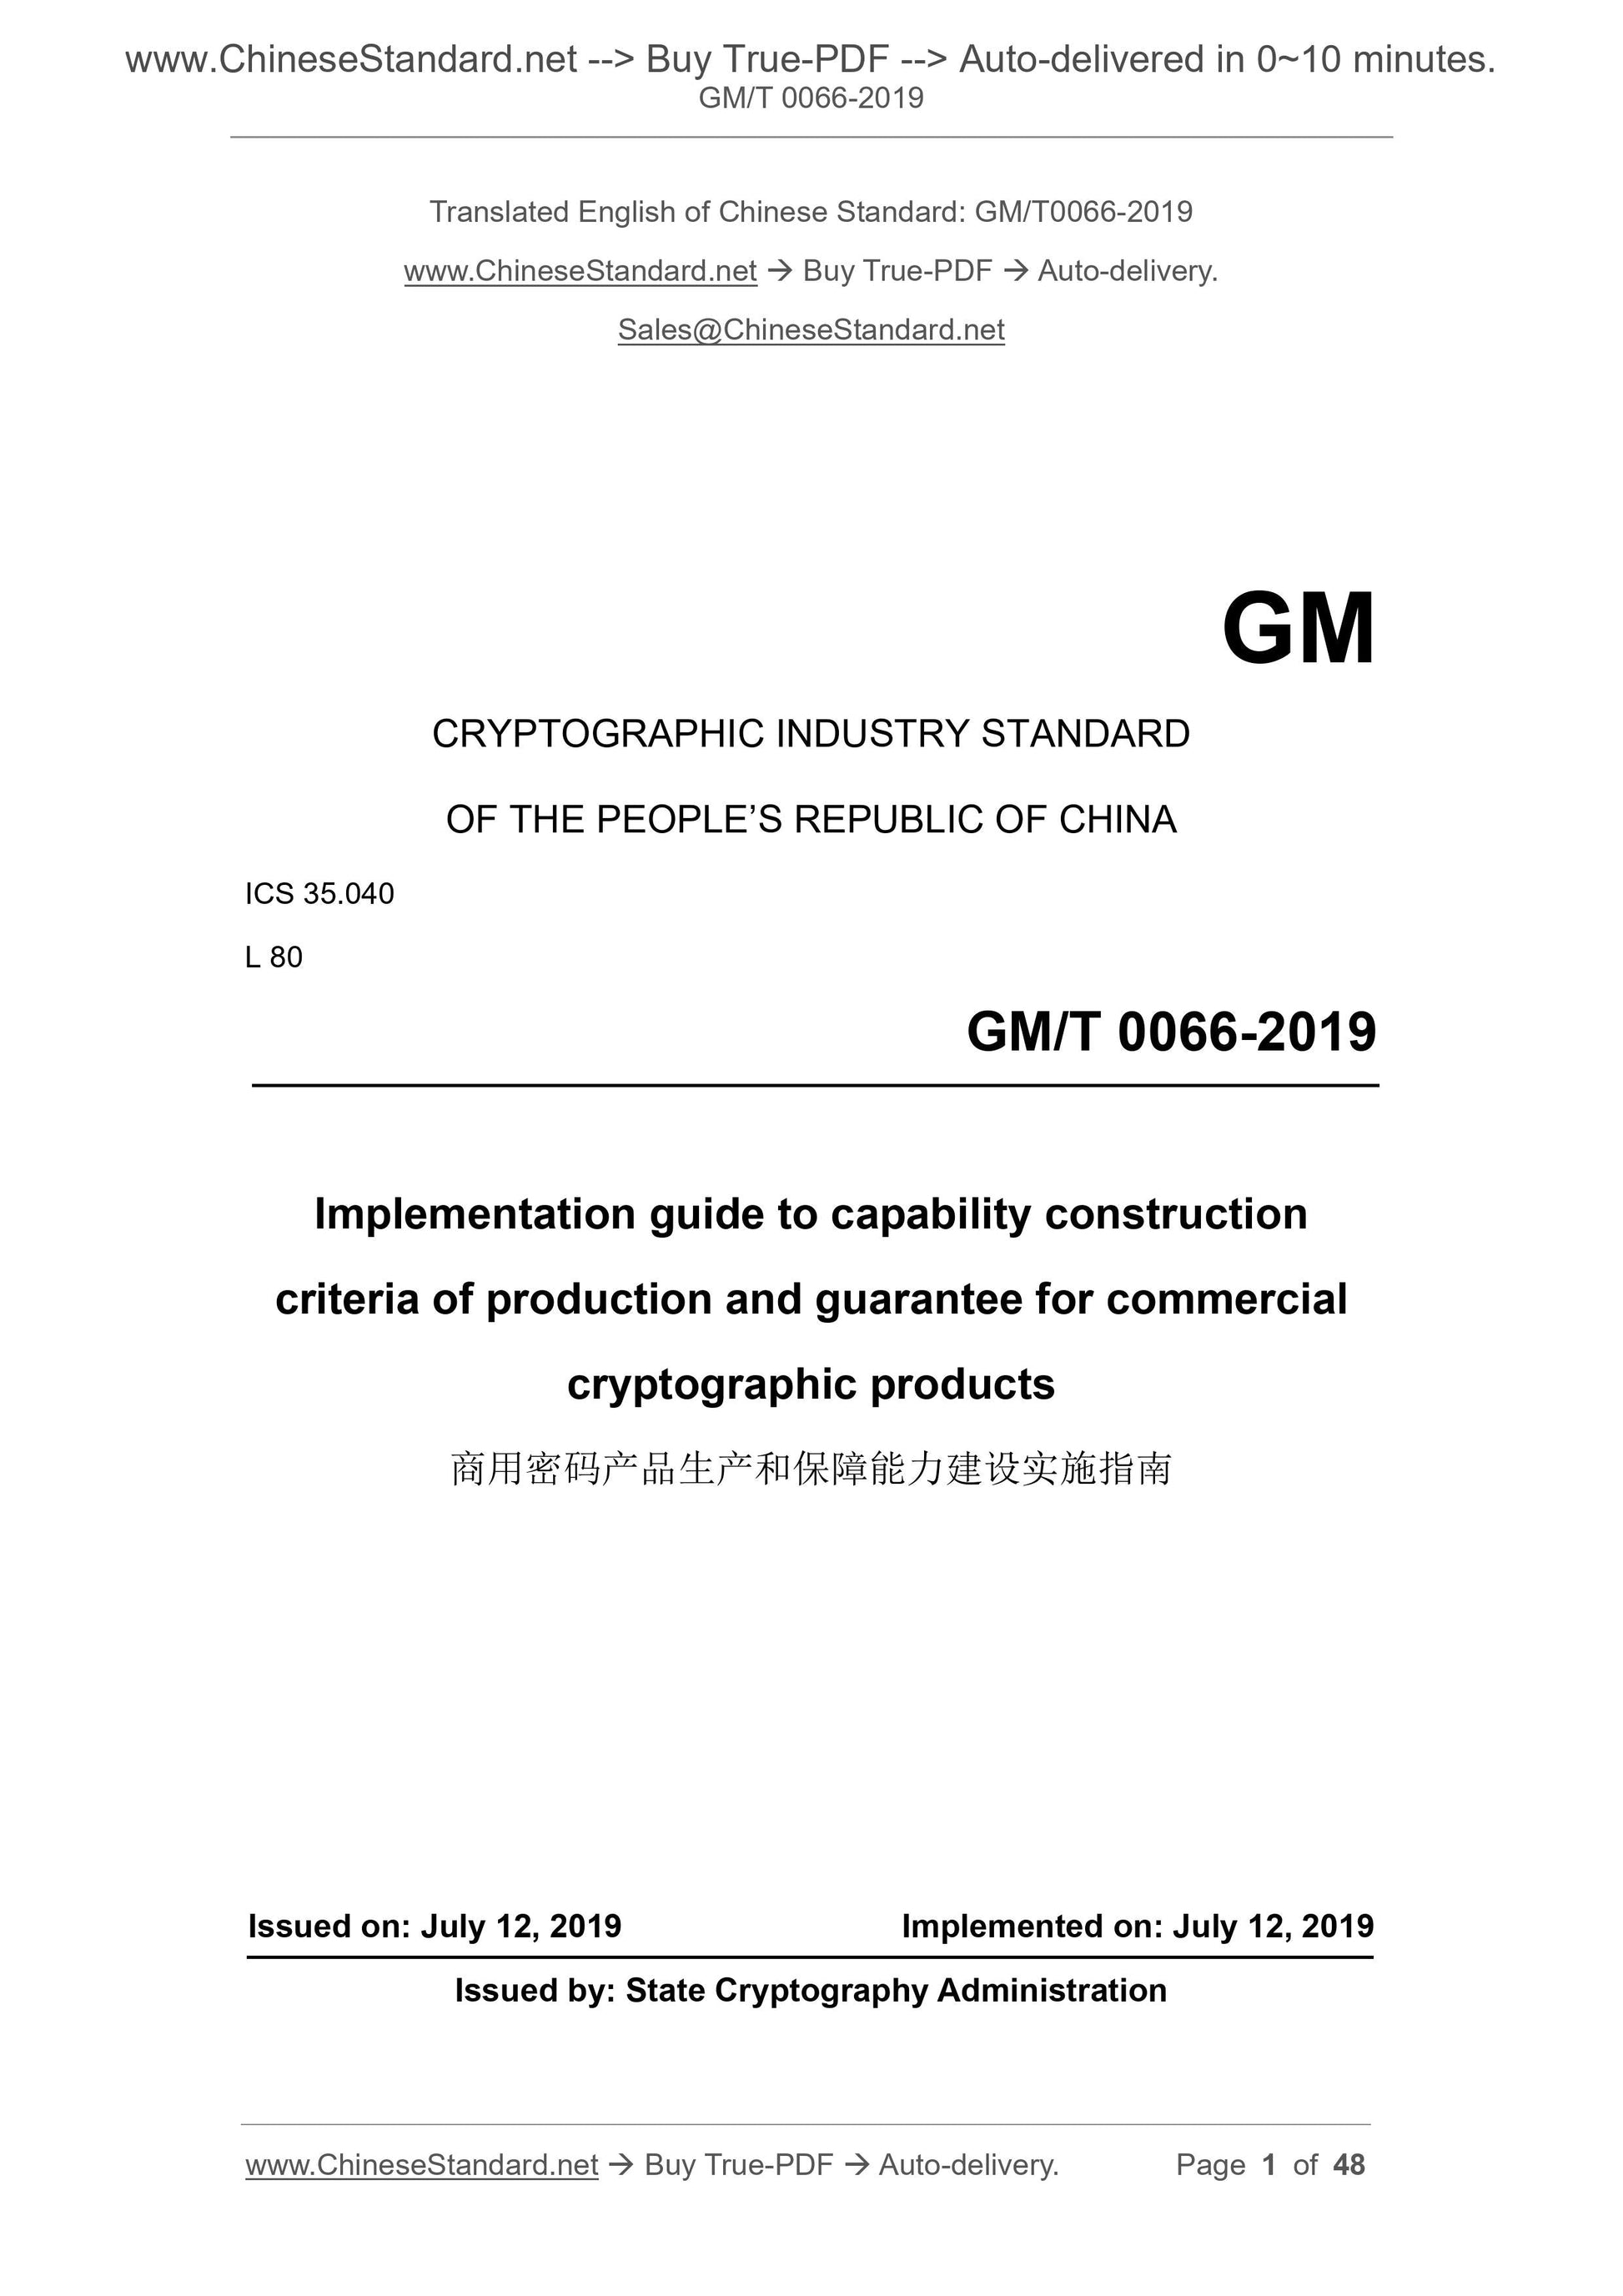 GM/T 0066-2019 Page 1